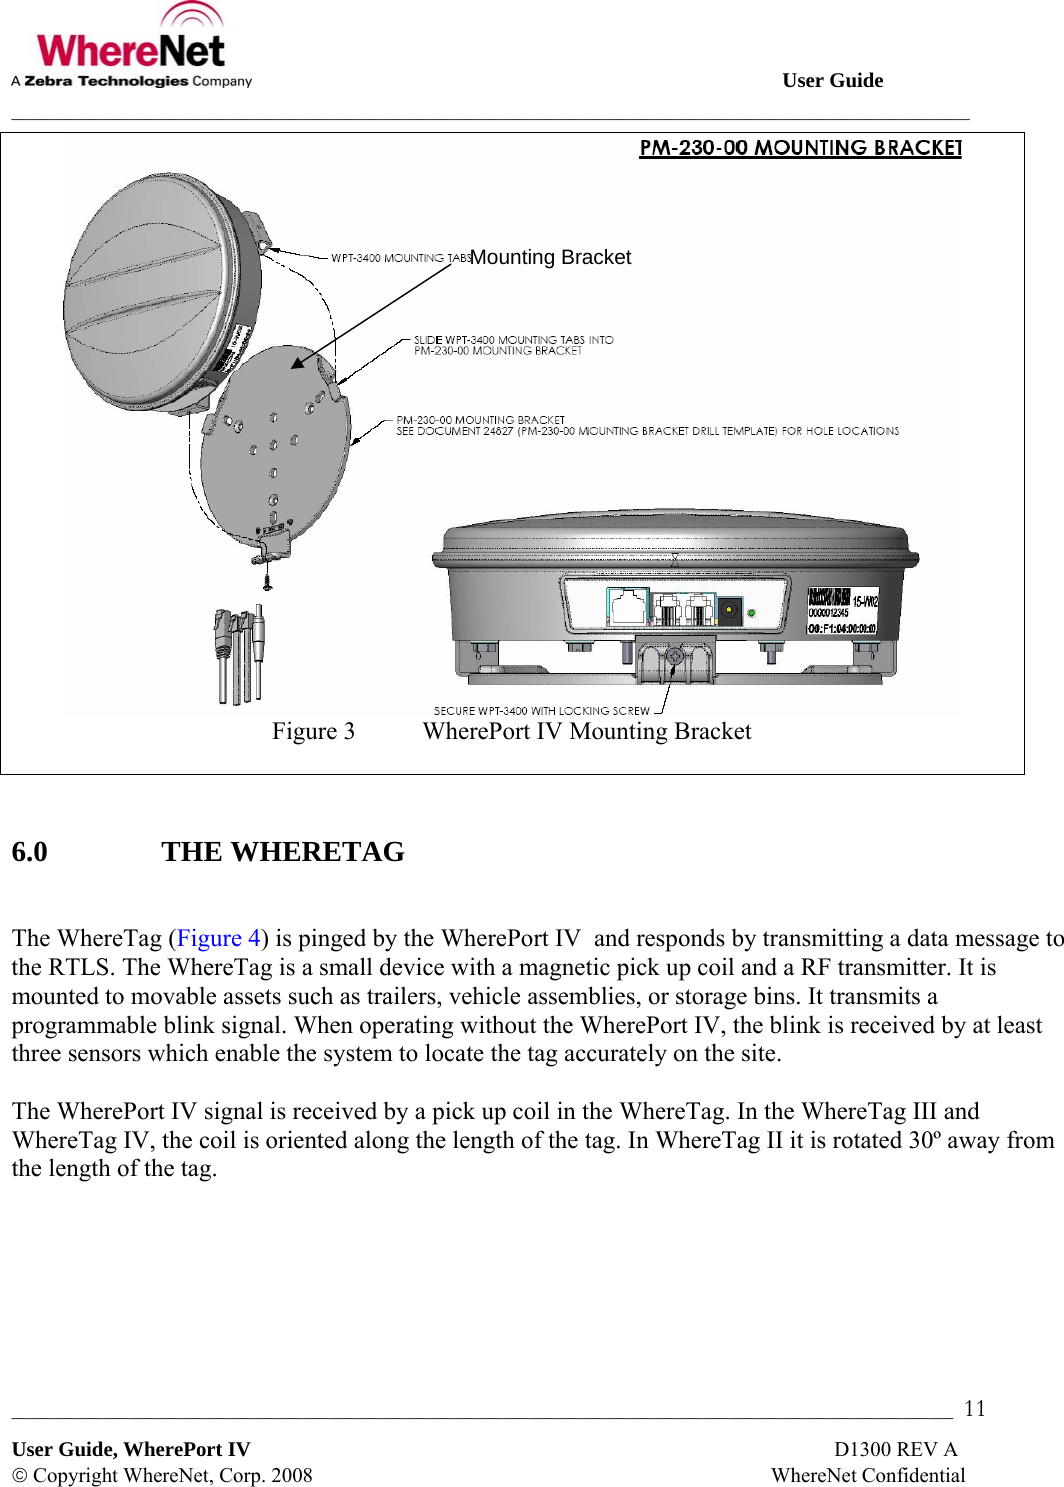                                                                                                       User Guide ___________________________________________________________________________________________________________________ _________________________________________________________________________________________________________________  11 User Guide, WherePort IV                                                                                                                D1300 REV A © Copyright WhereNet, Corp. 2008                                                                                        WhereNet Confidential  Figure 3  WherePort IV Mounting Bracket   6.0   THE WHERETAG  The WhereTag (Figure 4) is pinged by the WherePort IV  and responds by transmitting a data message to the RTLS. The WhereTag is a small device with a magnetic pick up coil and a RF transmitter. It is mounted to movable assets such as trailers, vehicle assemblies, or storage bins. It transmits a programmable blink signal. When operating without the WherePort IV, the blink is received by at least three sensors which enable the system to locate the tag accurately on the site.  The WherePort IV signal is received by a pick up coil in the WhereTag. In the WhereTag III and WhereTag IV, the coil is oriented along the length of the tag. In WhereTag II it is rotated 30º away from the length of the tag.  Mounting Bracket 